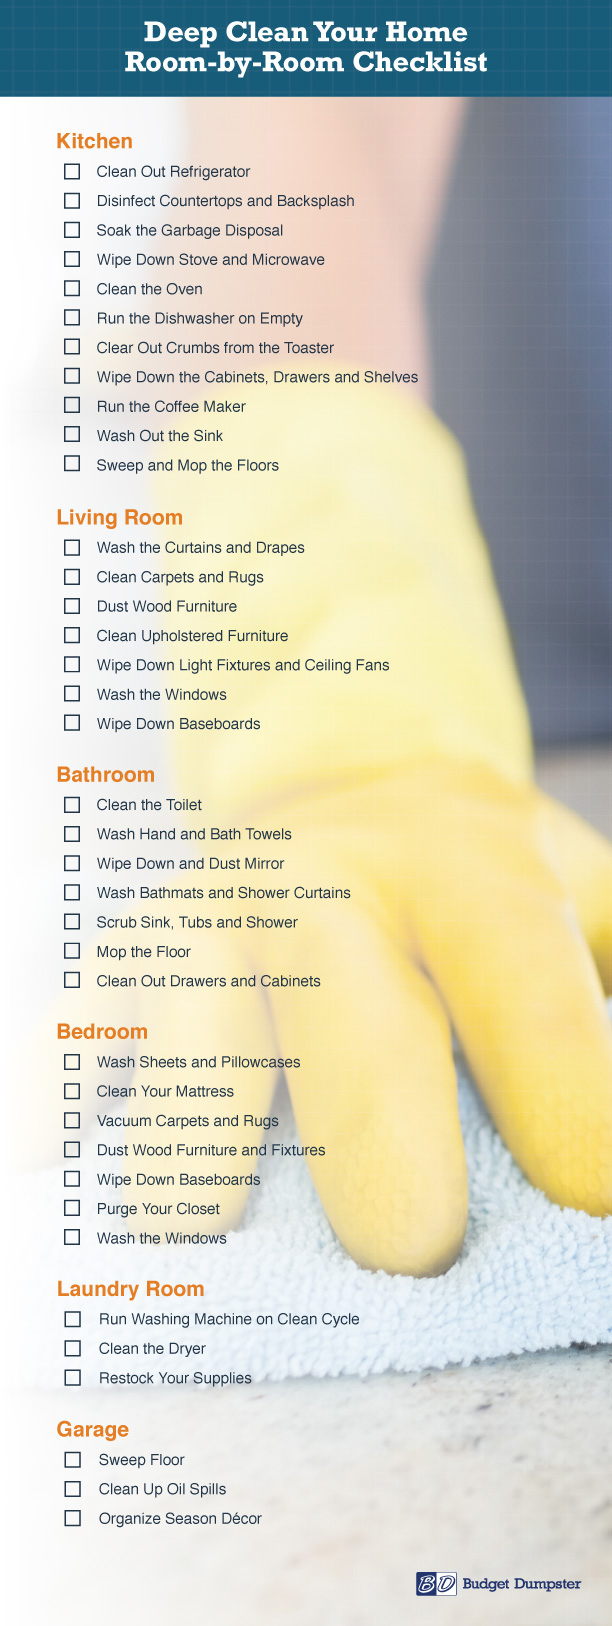 Deep Clean Your Home Room-by-Room Checklist